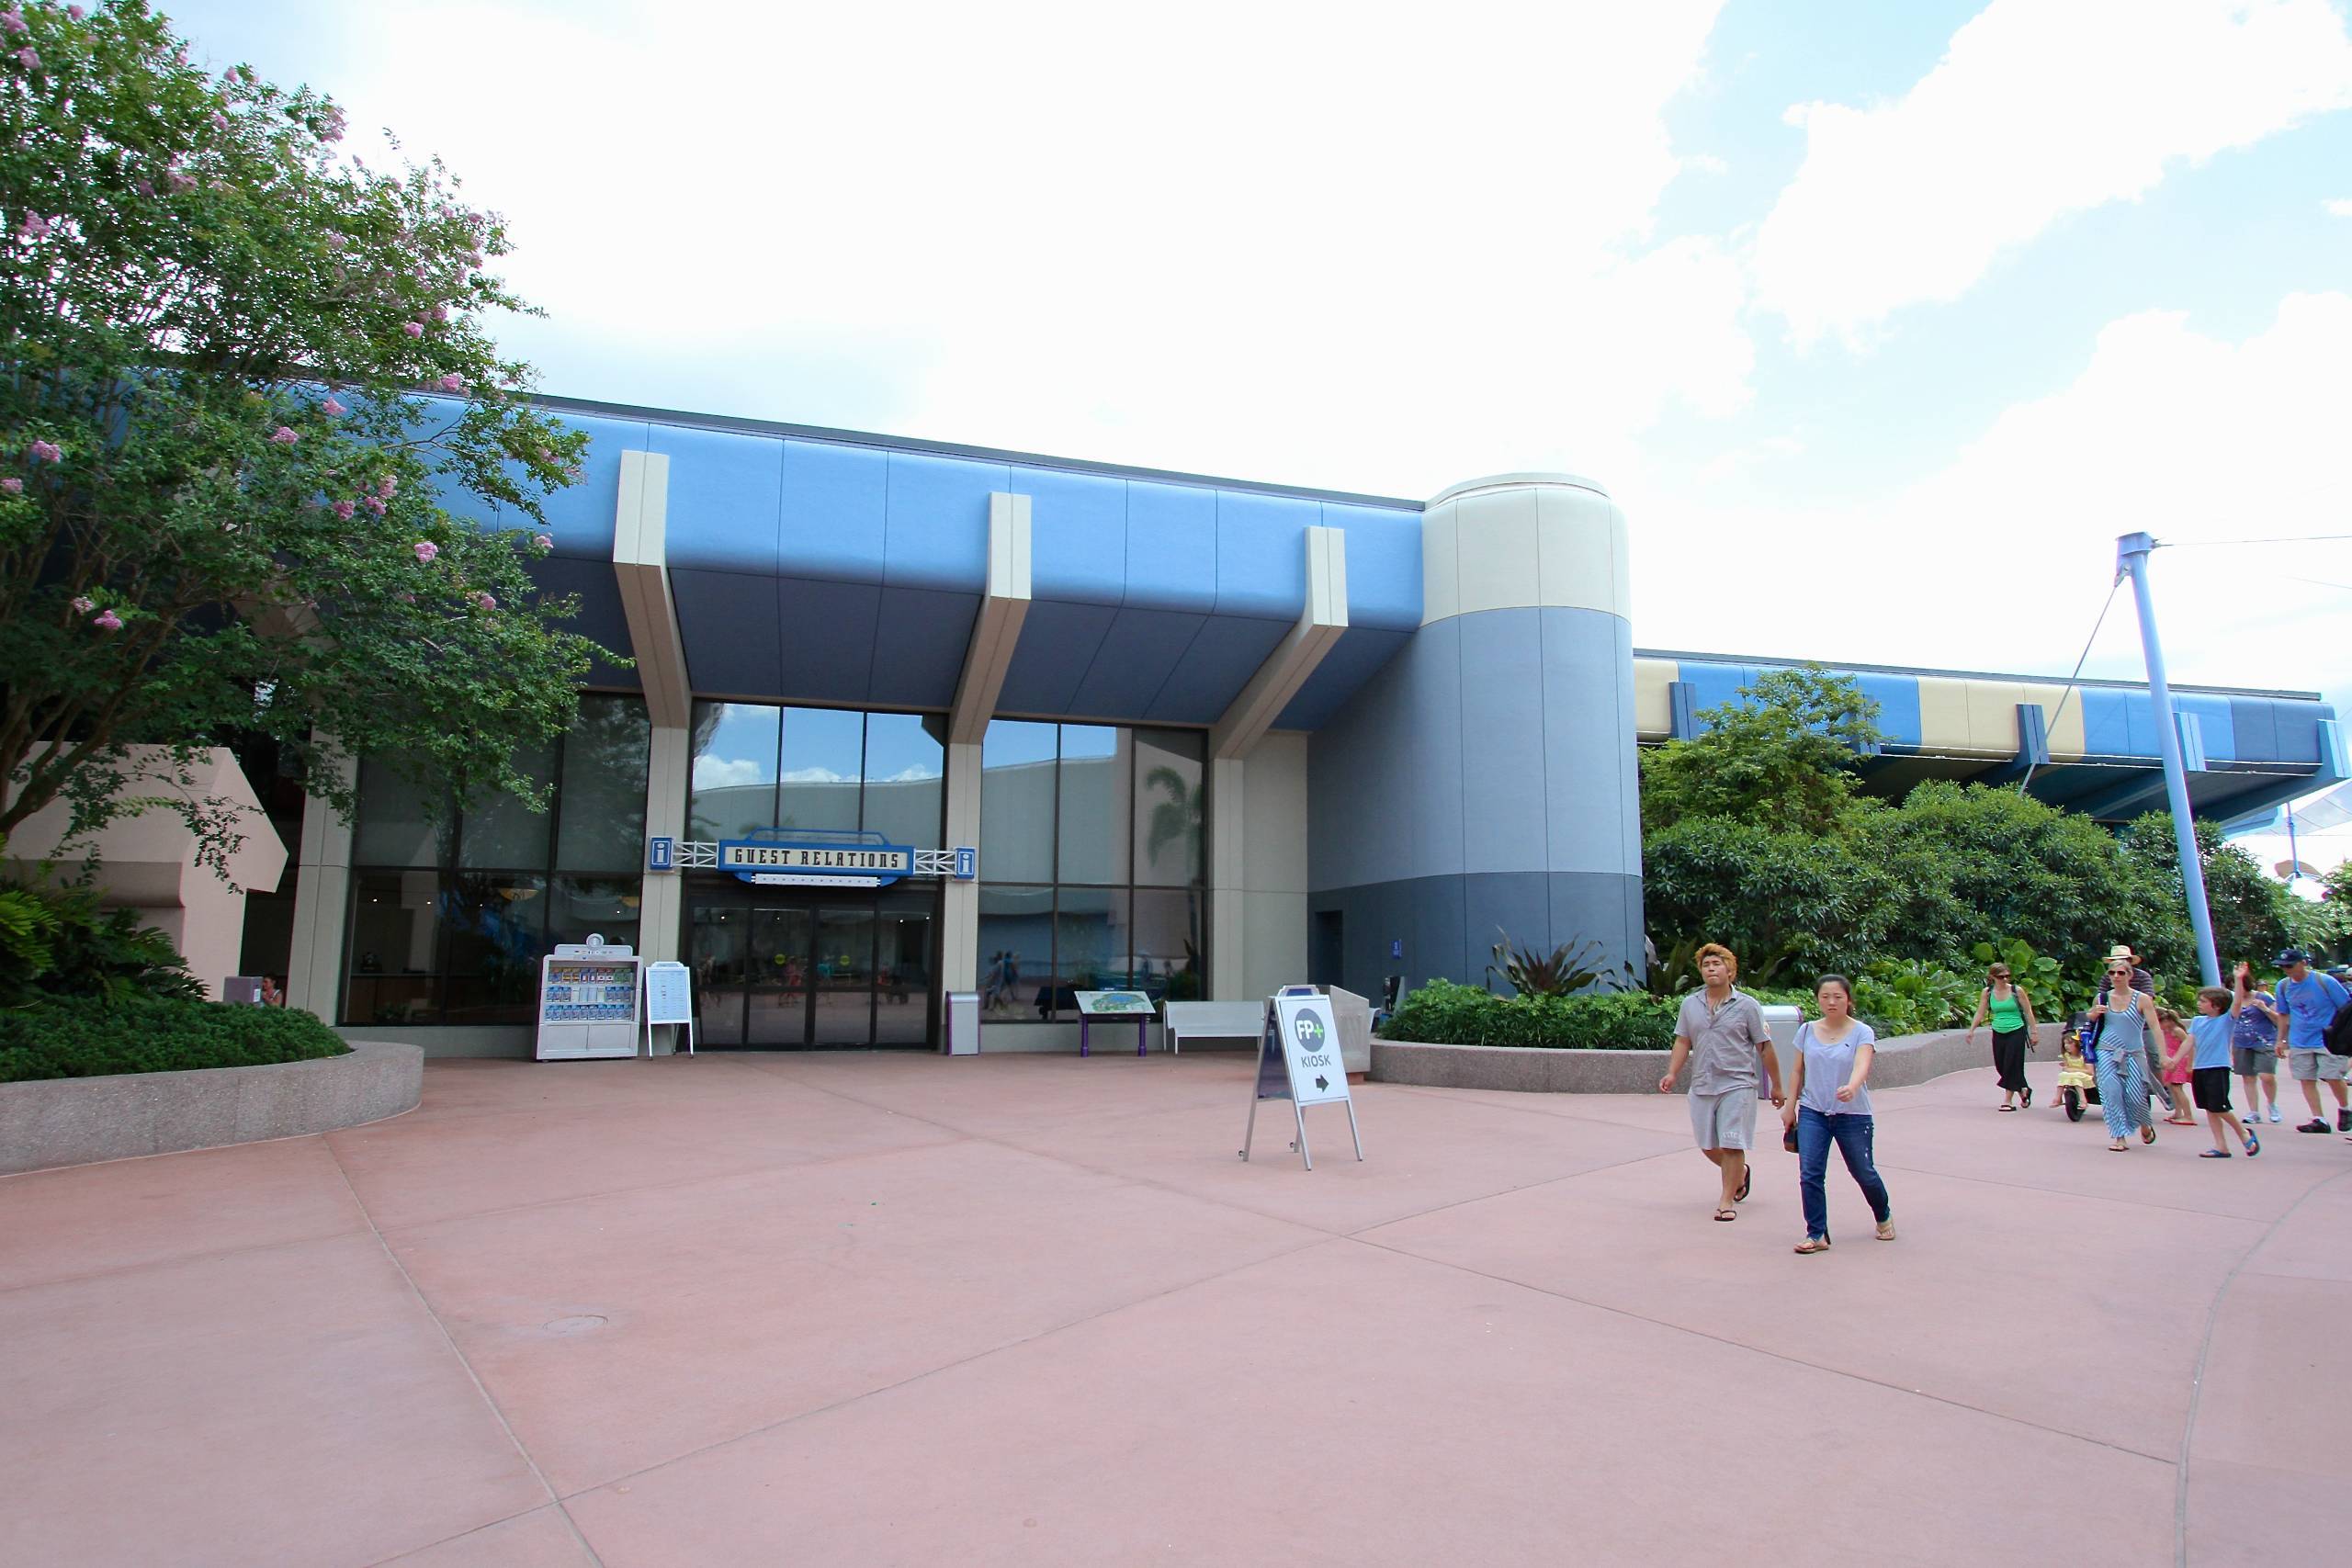 PHOTOS - Future World's new color scheme expands to more areas of the park